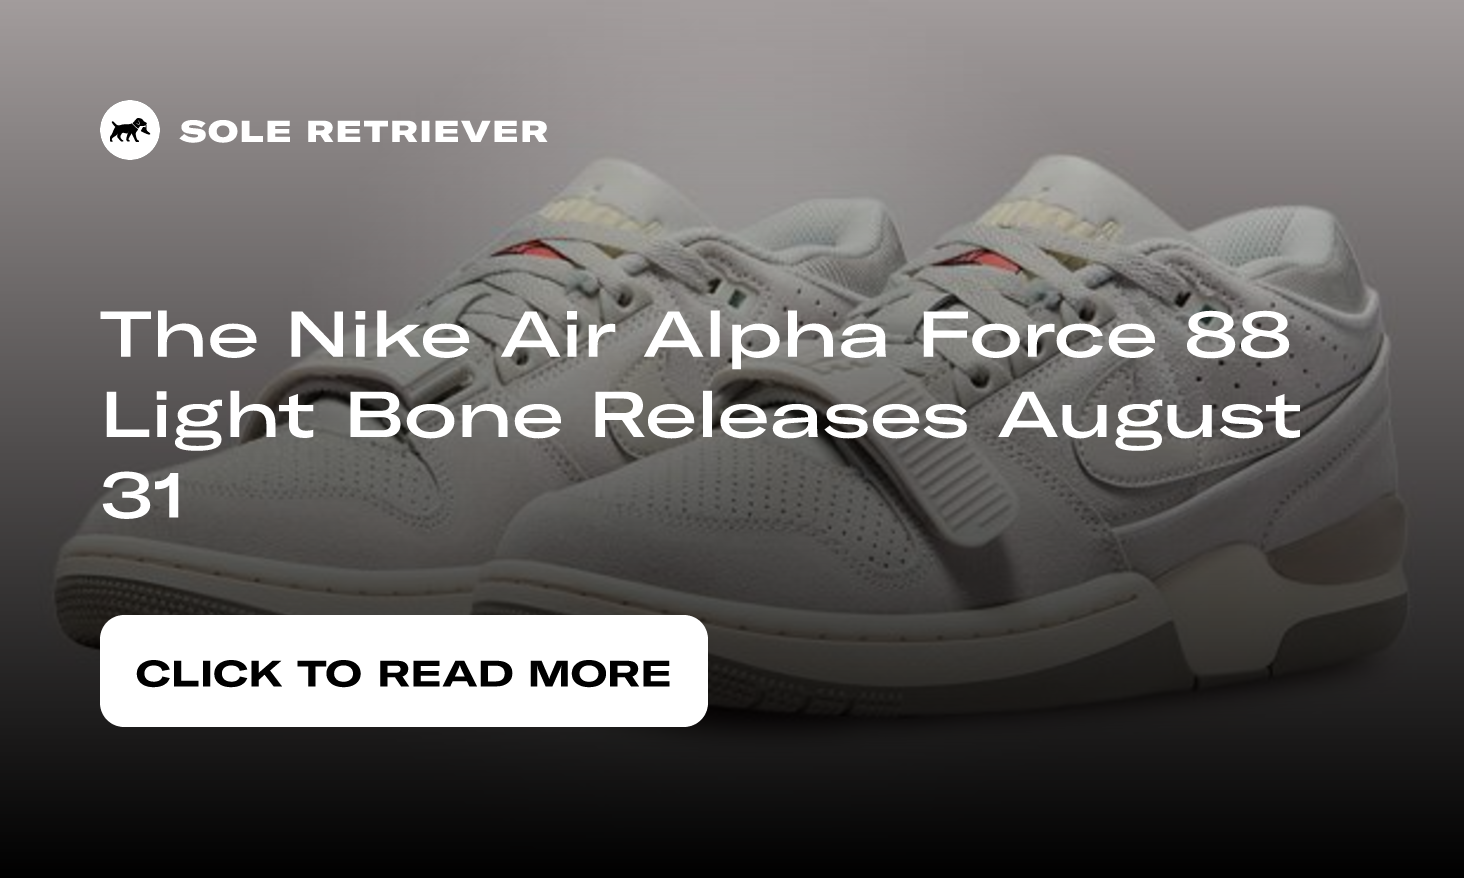 The Nike Air Alpha Force 88 Light Bone Releases August 31